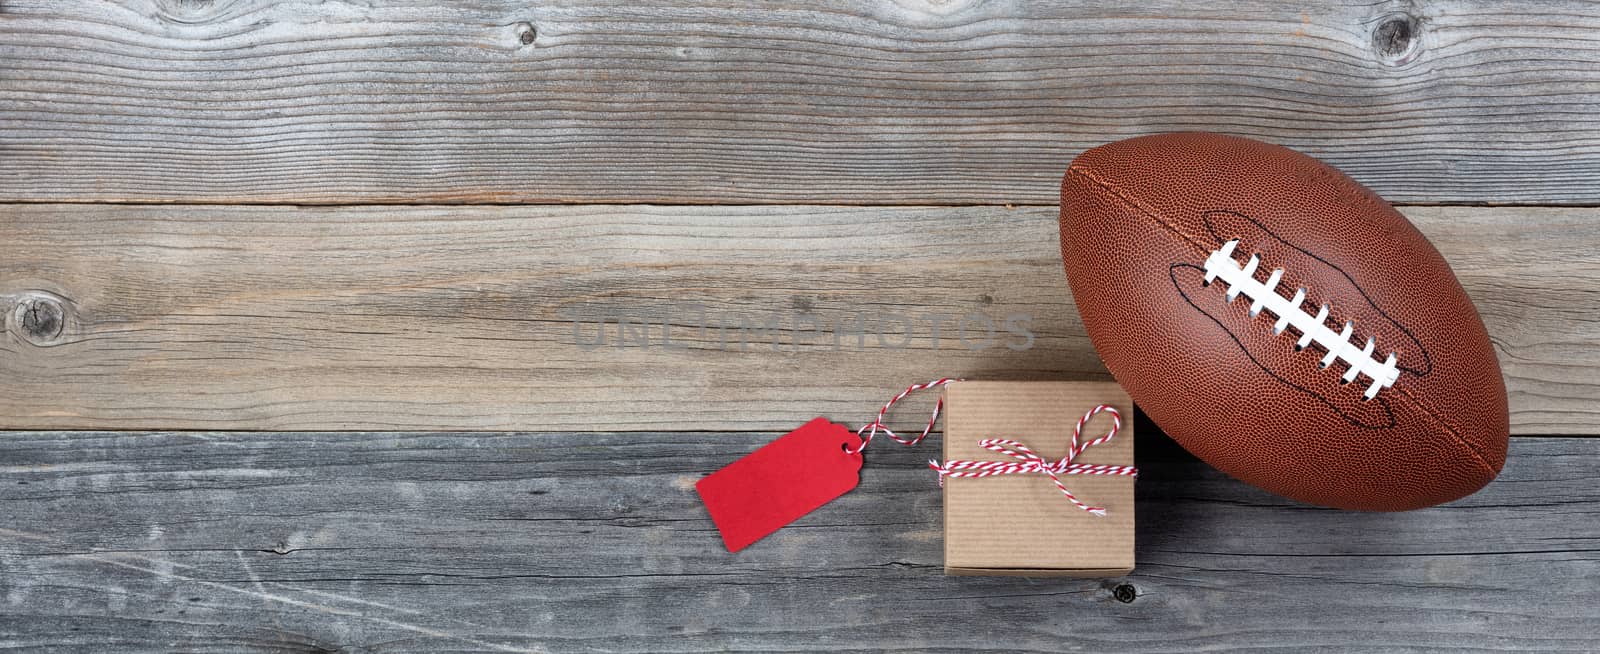 Fathers day gift box and single football on rustic wooden plank  by tab1962